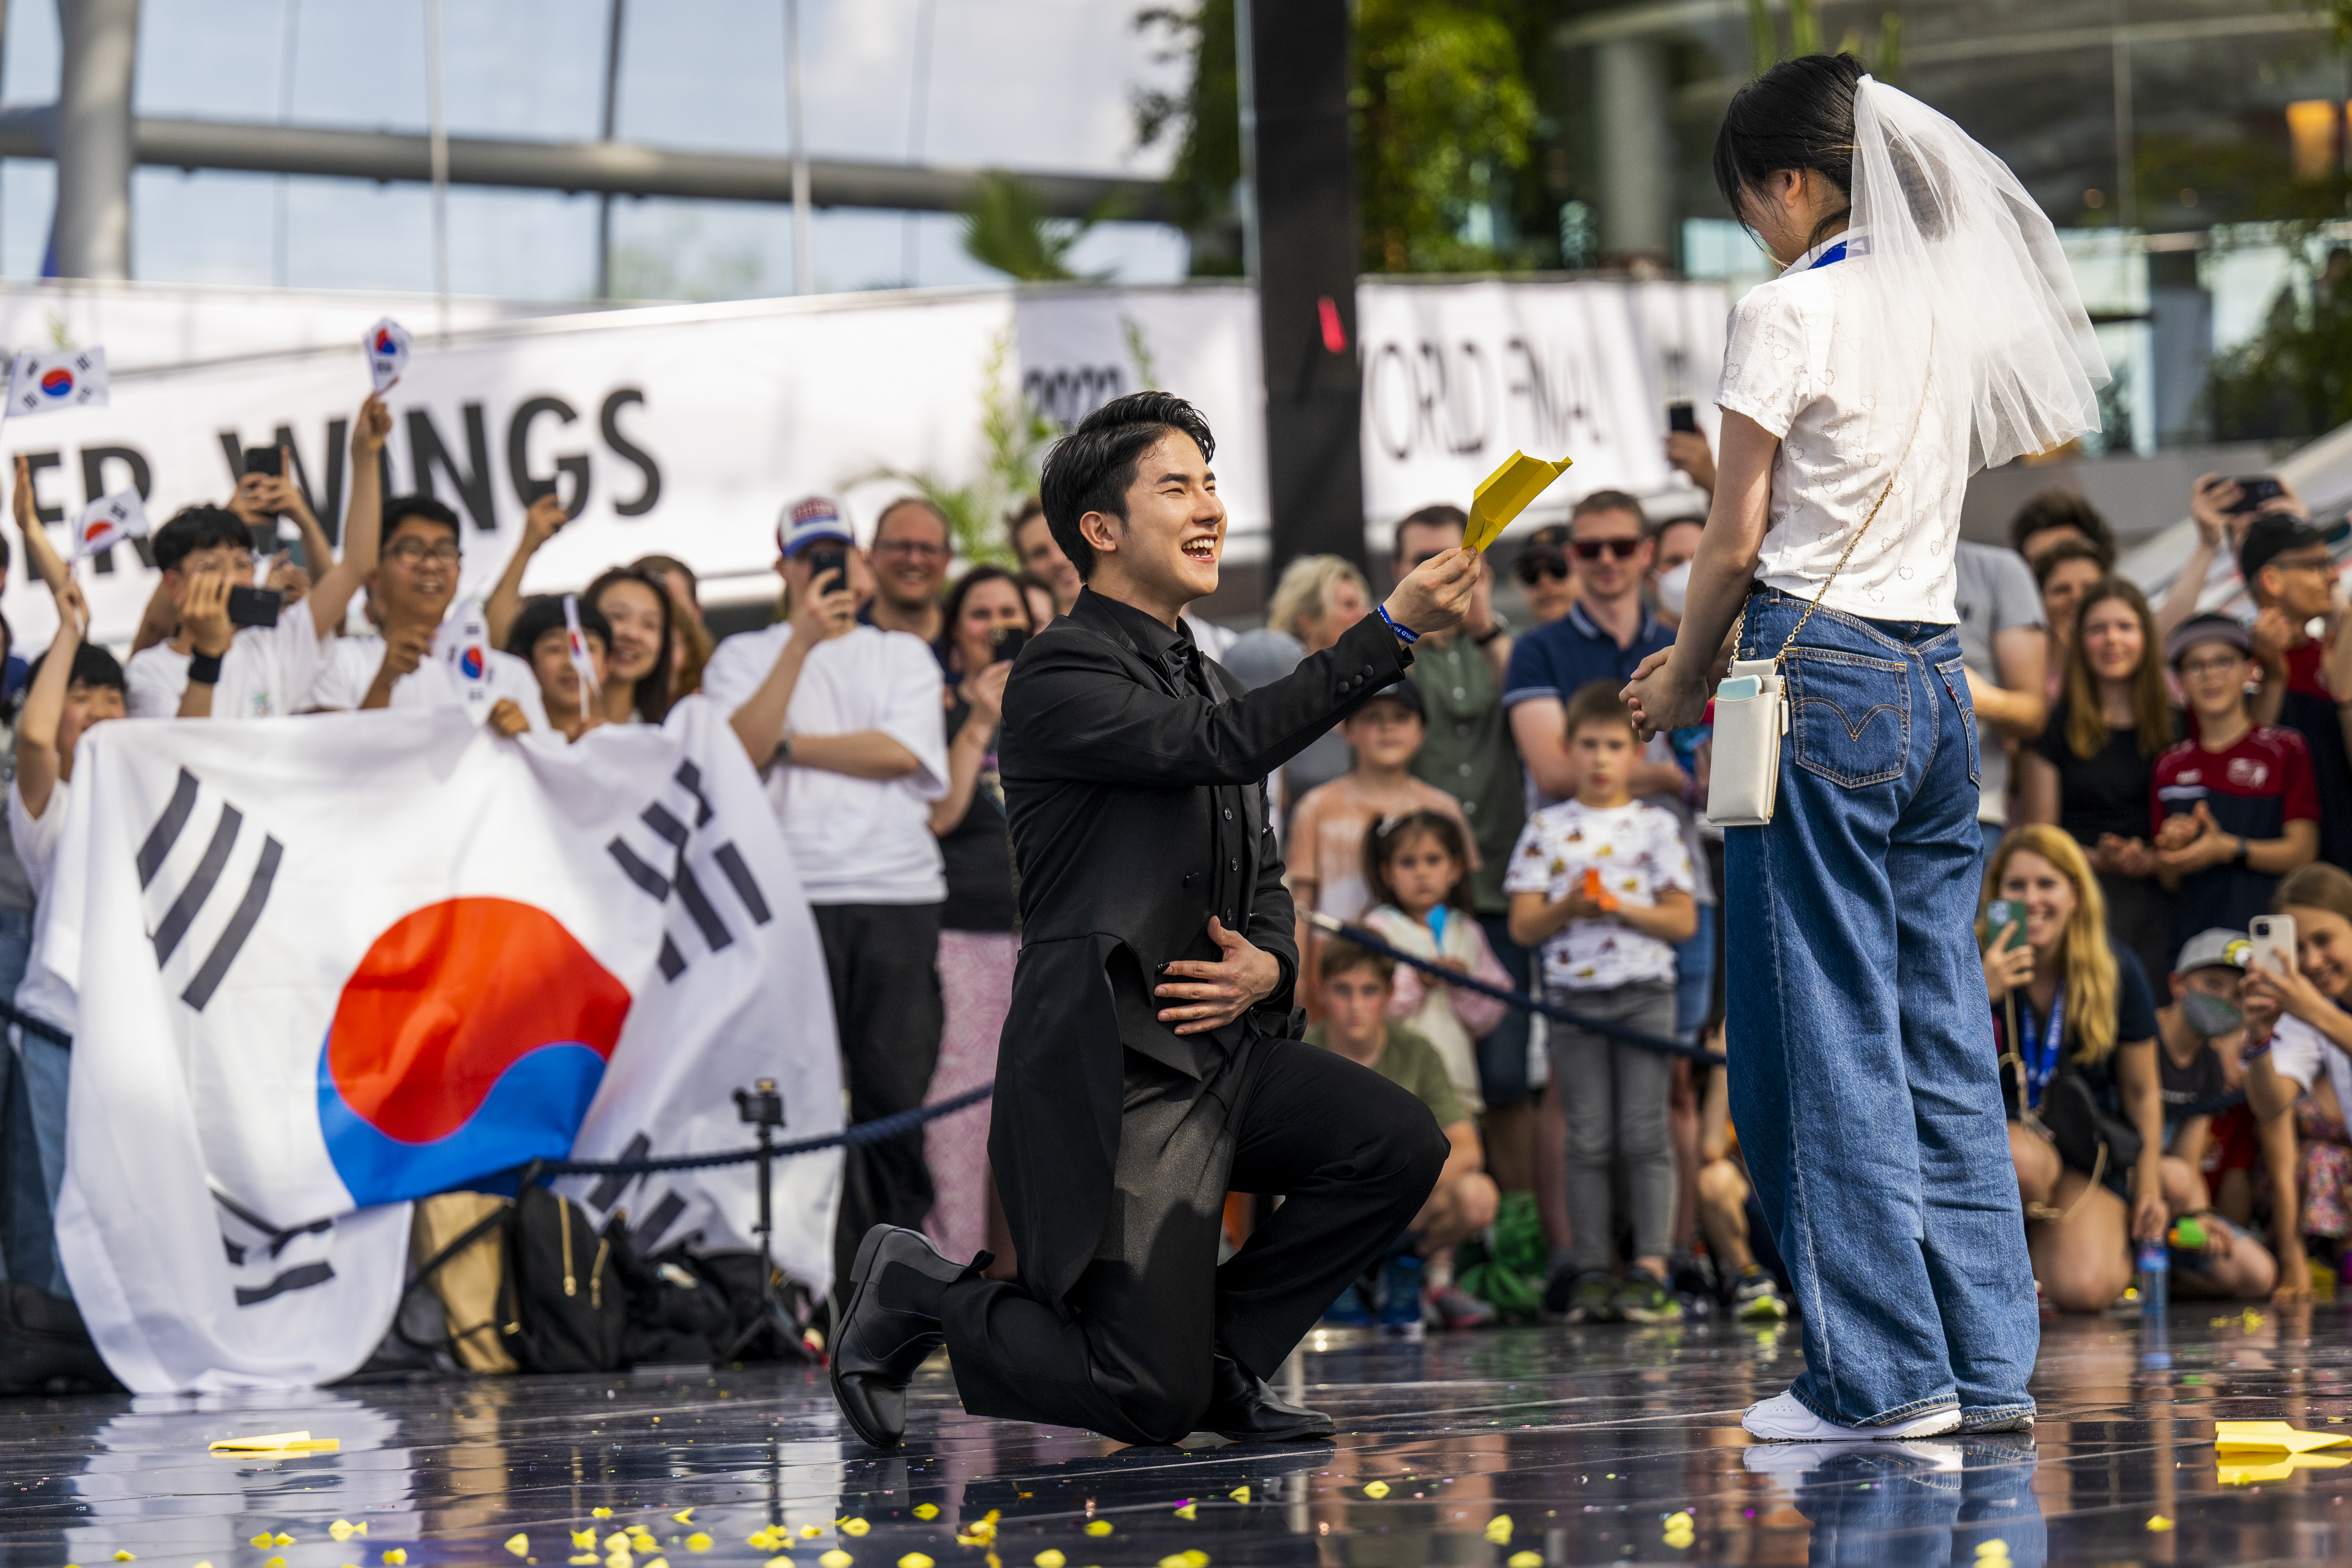 Aerobatics winner Seunghoon Lee, from South Korea, proposed to his girlfriend after being crowned the champion.